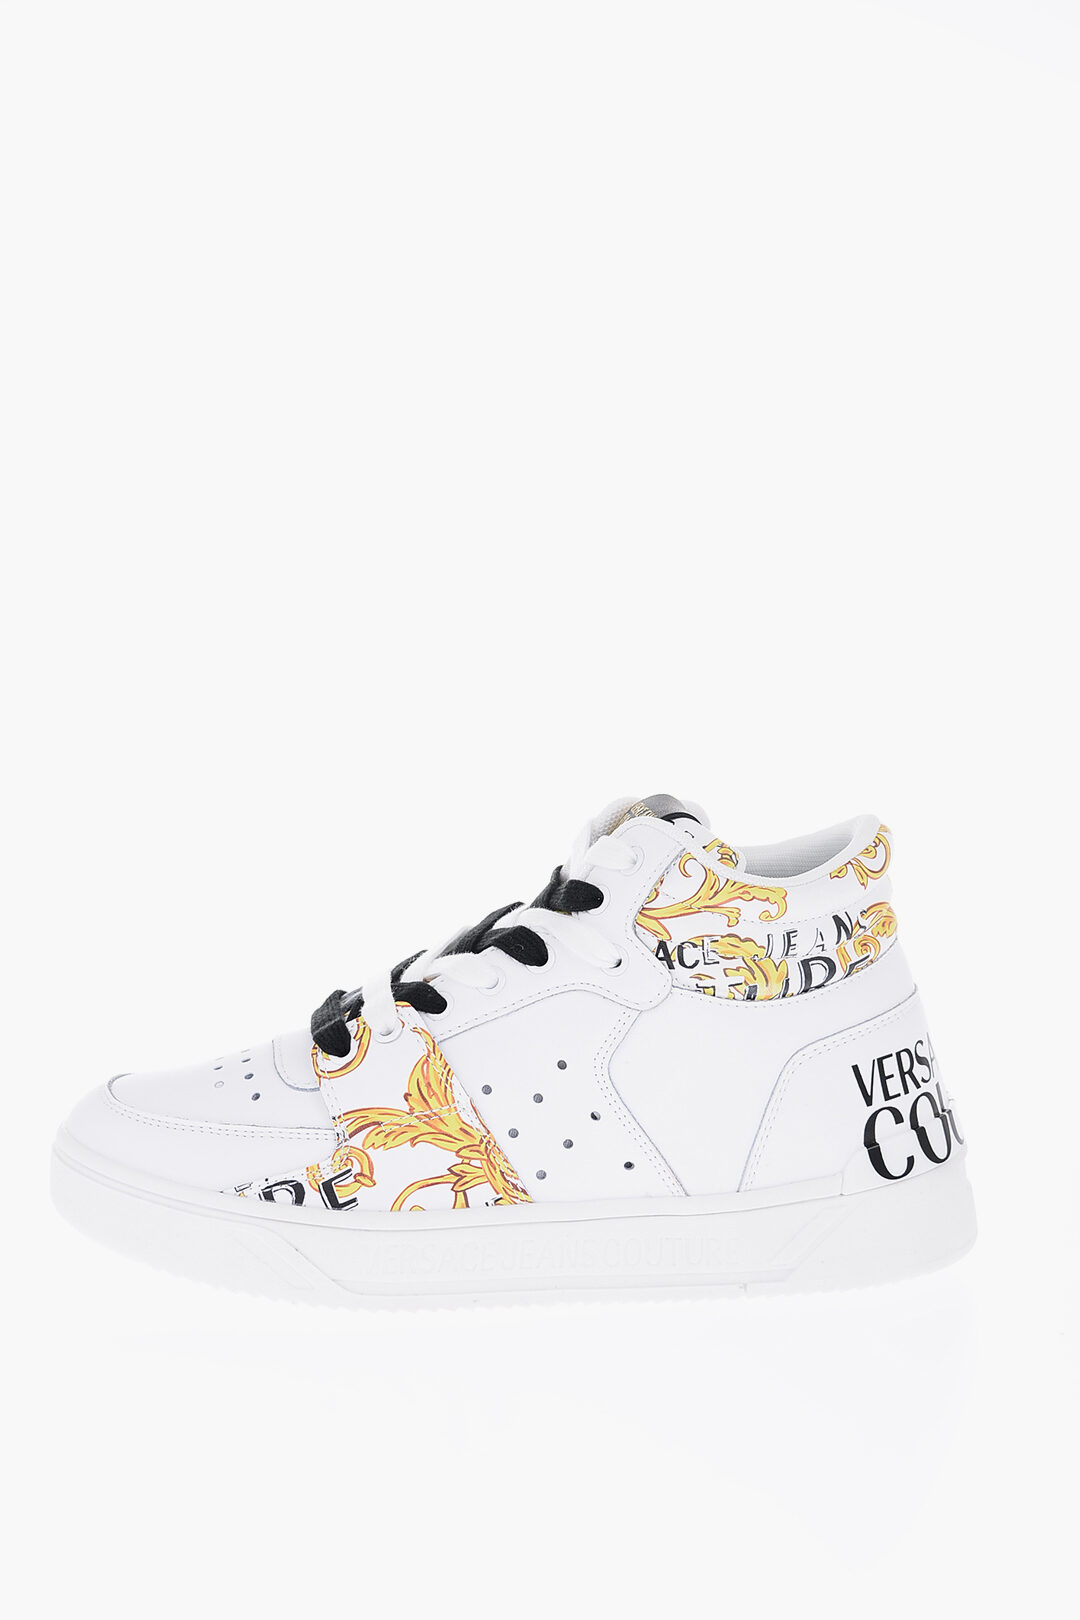 https://data.glamood.com/imgprodotto/jeans-couture-baroque-printed-leather-starlight-high-top-sneakers_1367991_zoom.jpg